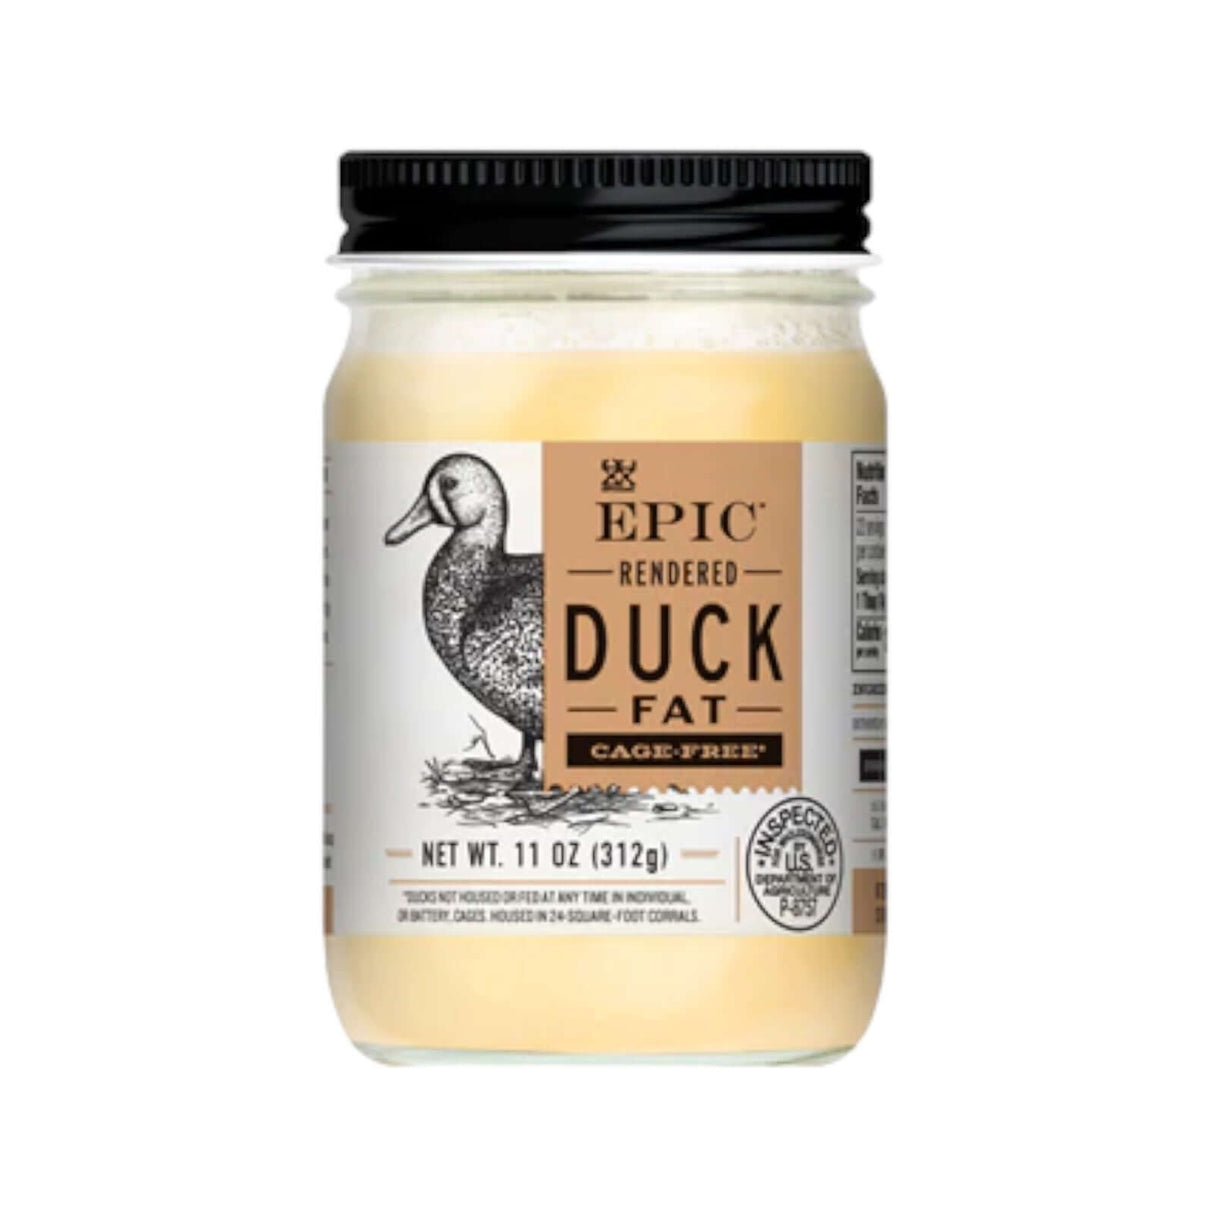 Epic Rendered Duck Fat